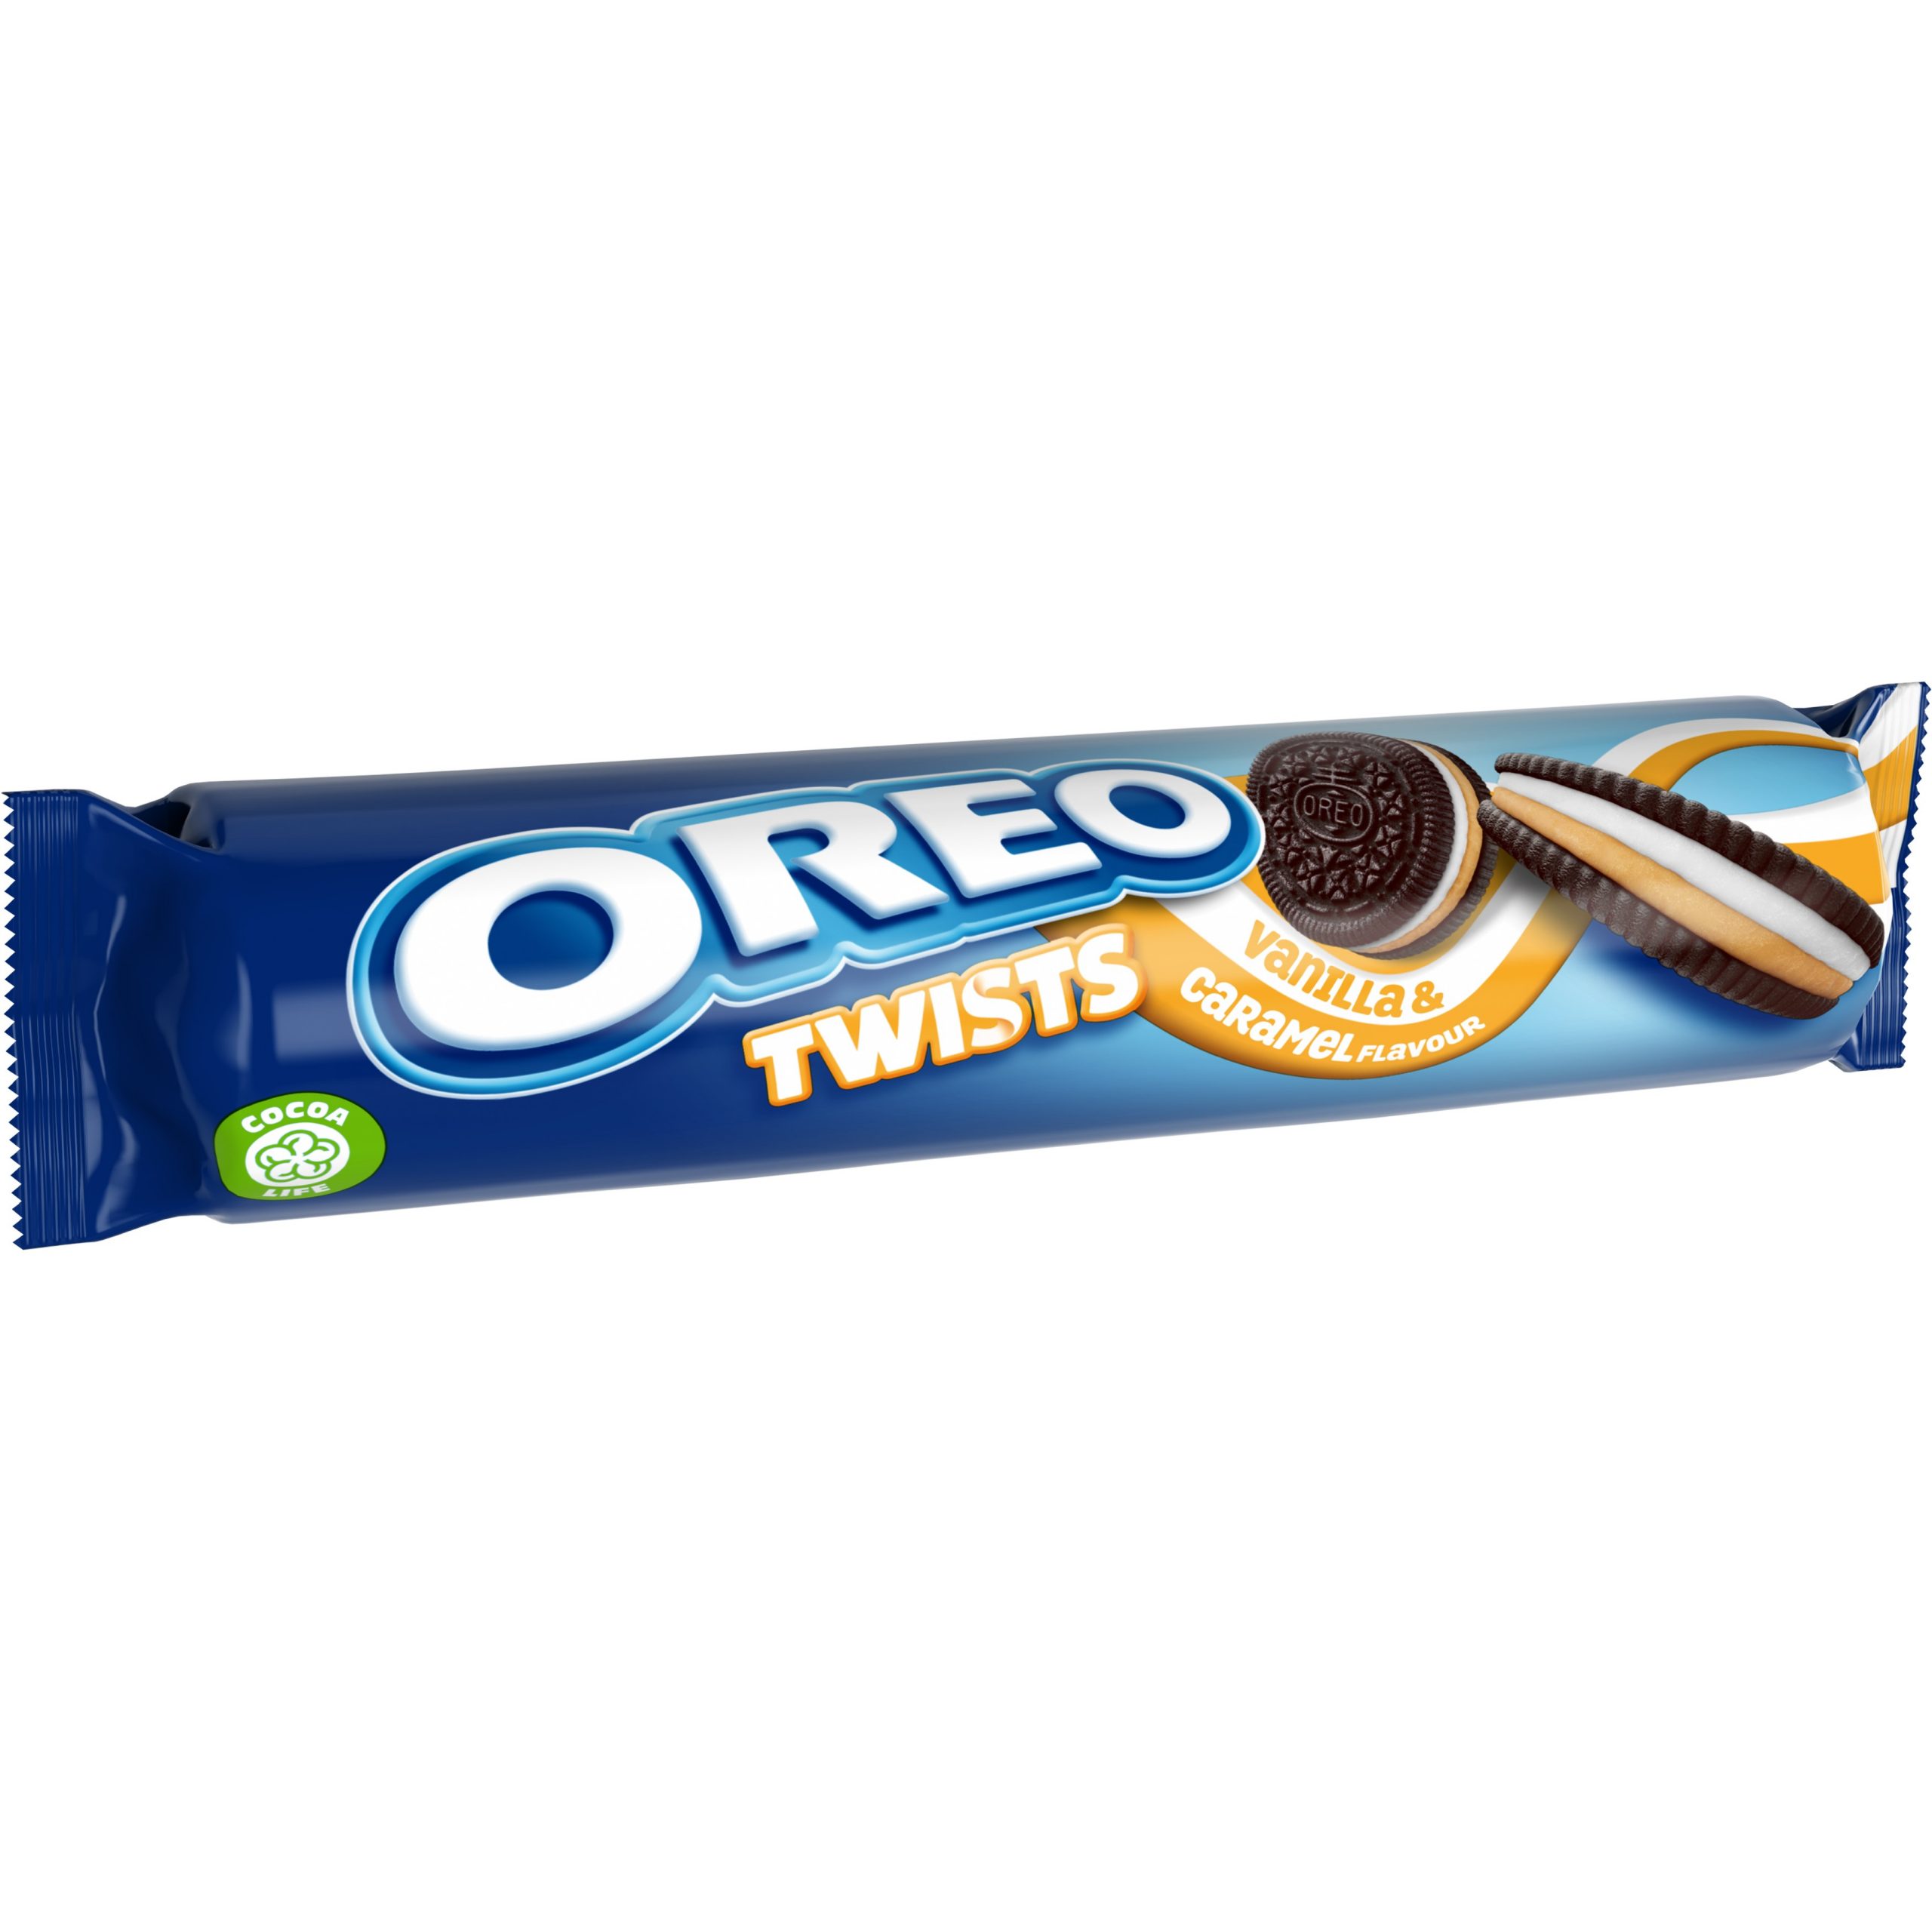 Oreo adds twist to biscuit aisle with two new flavours